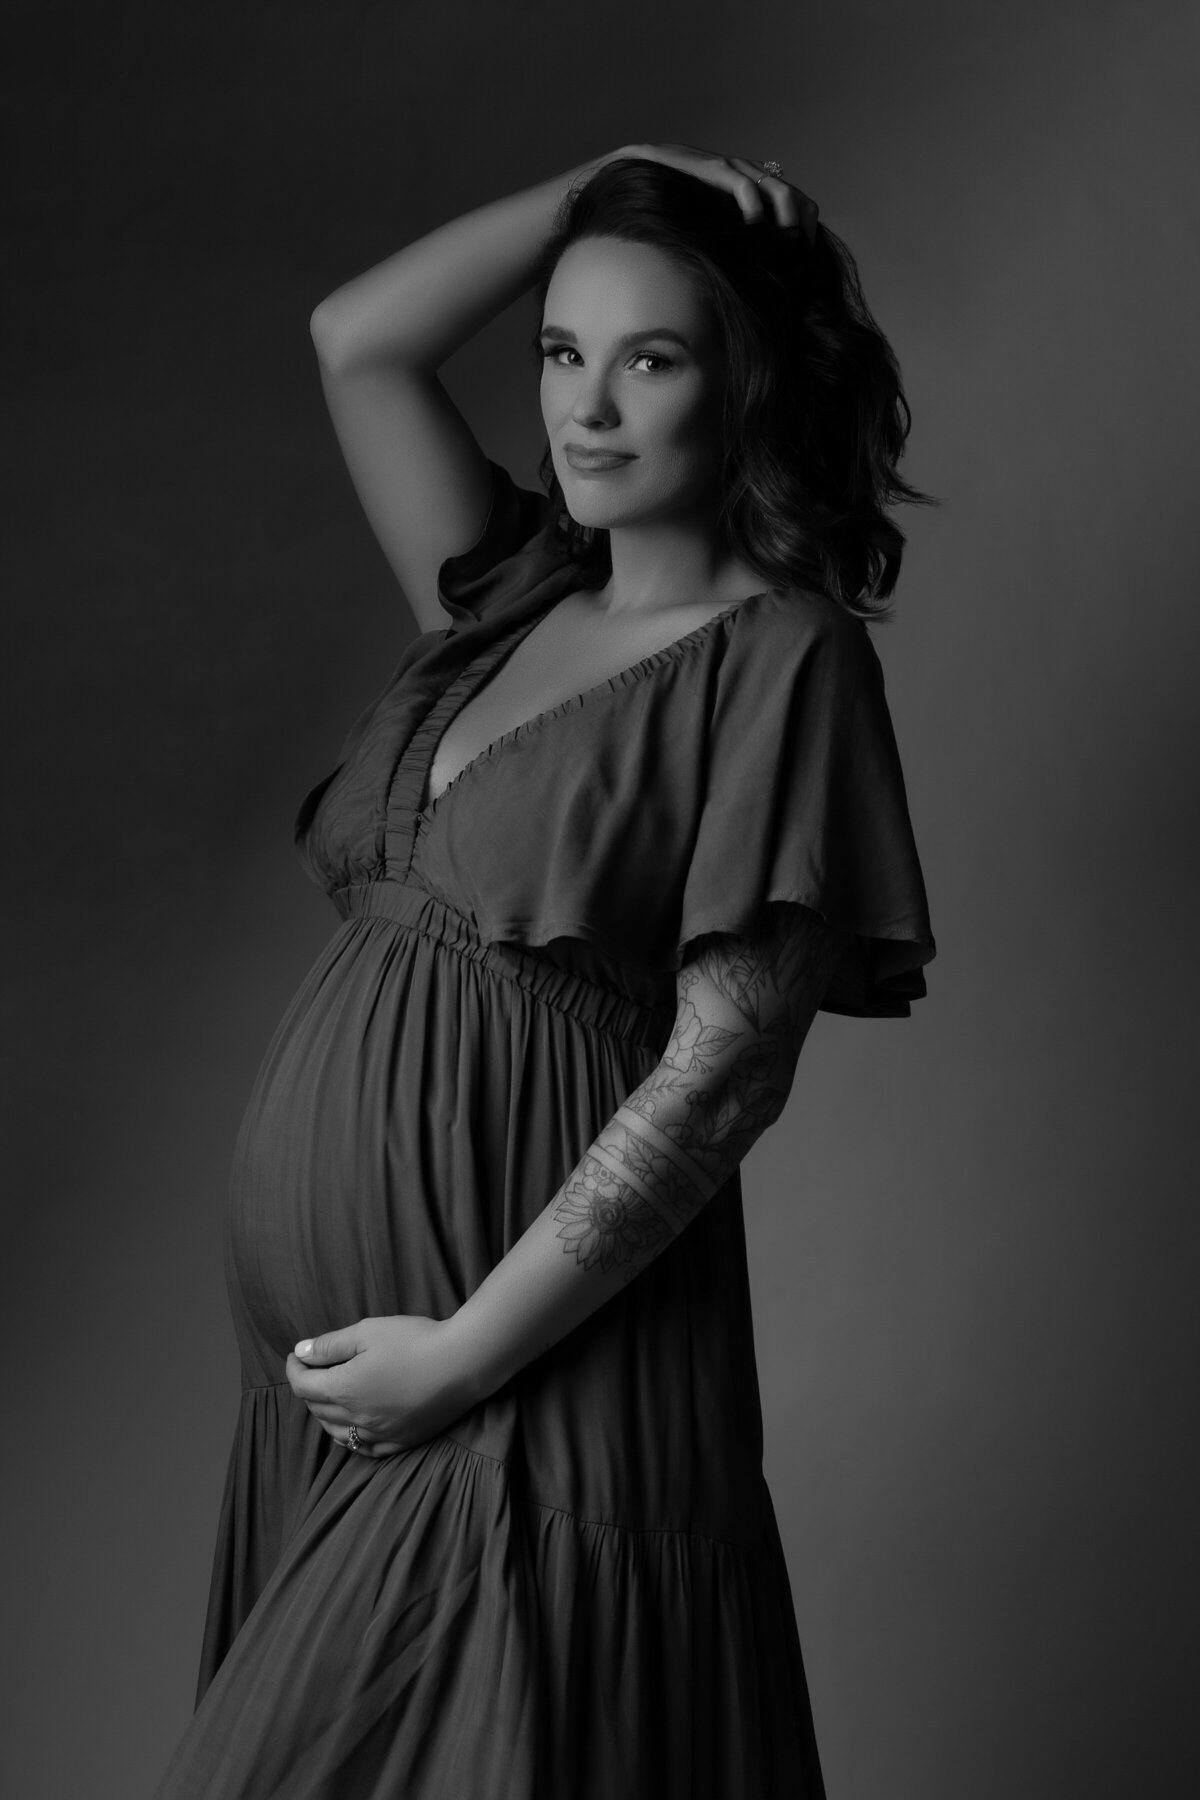 In BW Raleigh NC Maternity Portrait Photographer 14